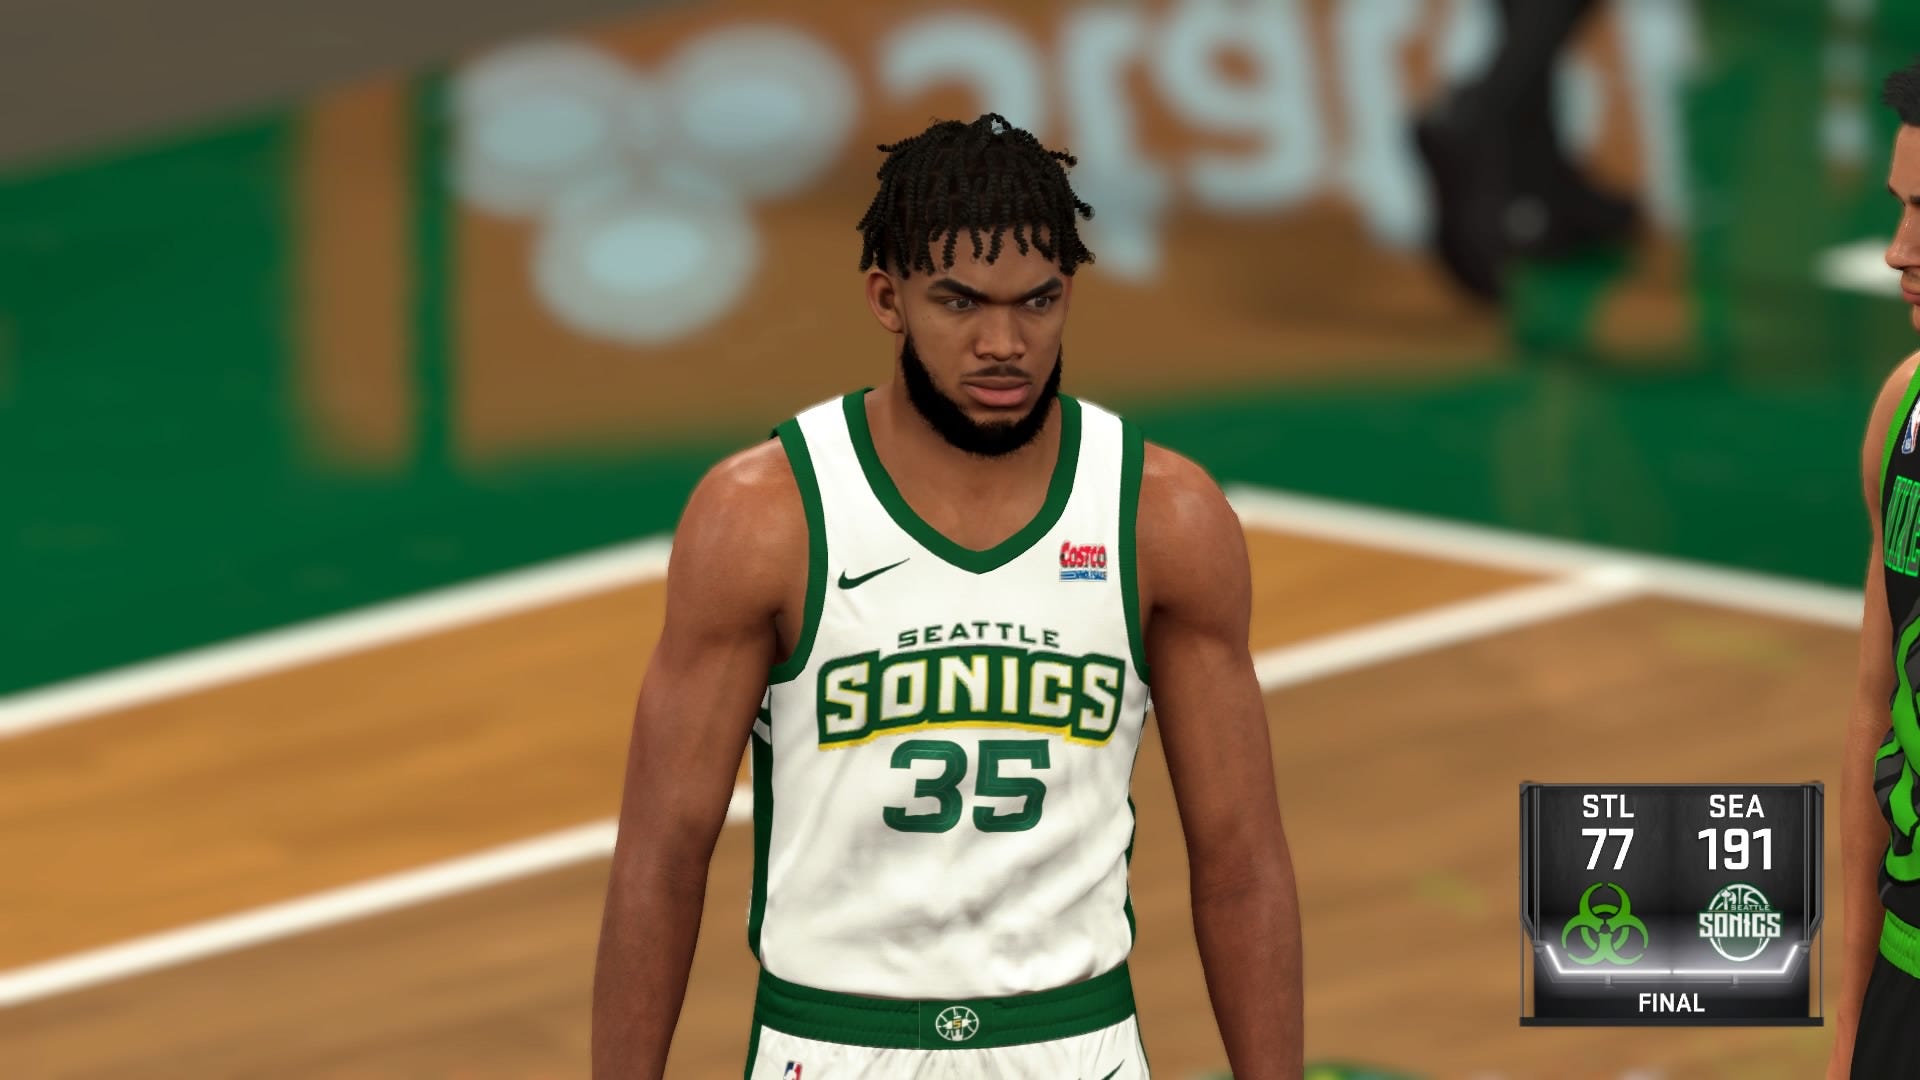 check out the new seattle sonics jerseys : r/NBA2k